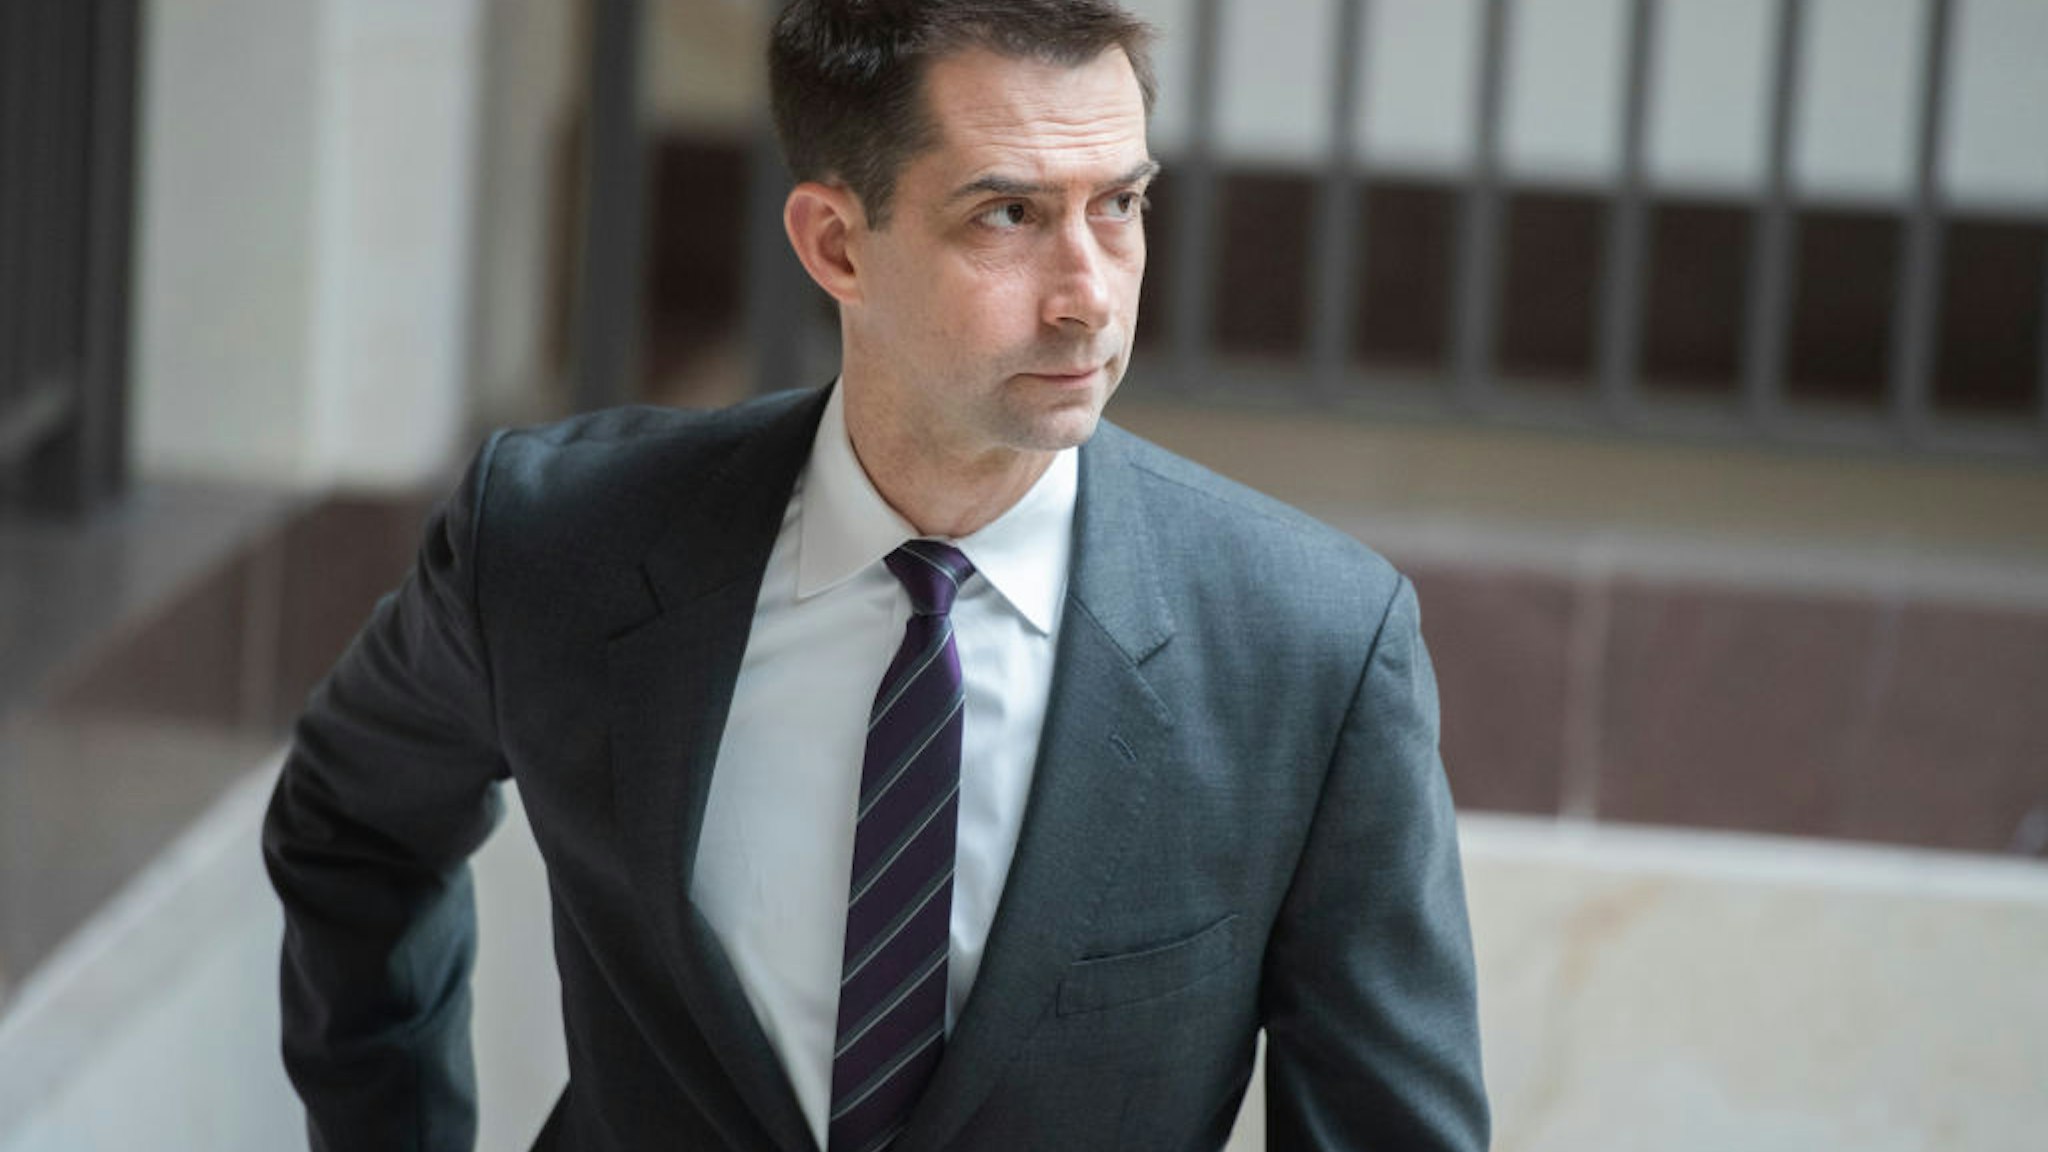 Sen. Tom Cotton, R-Ark., is seen in the Capitol Visitor Center on Tuesday, May 19, 2020.